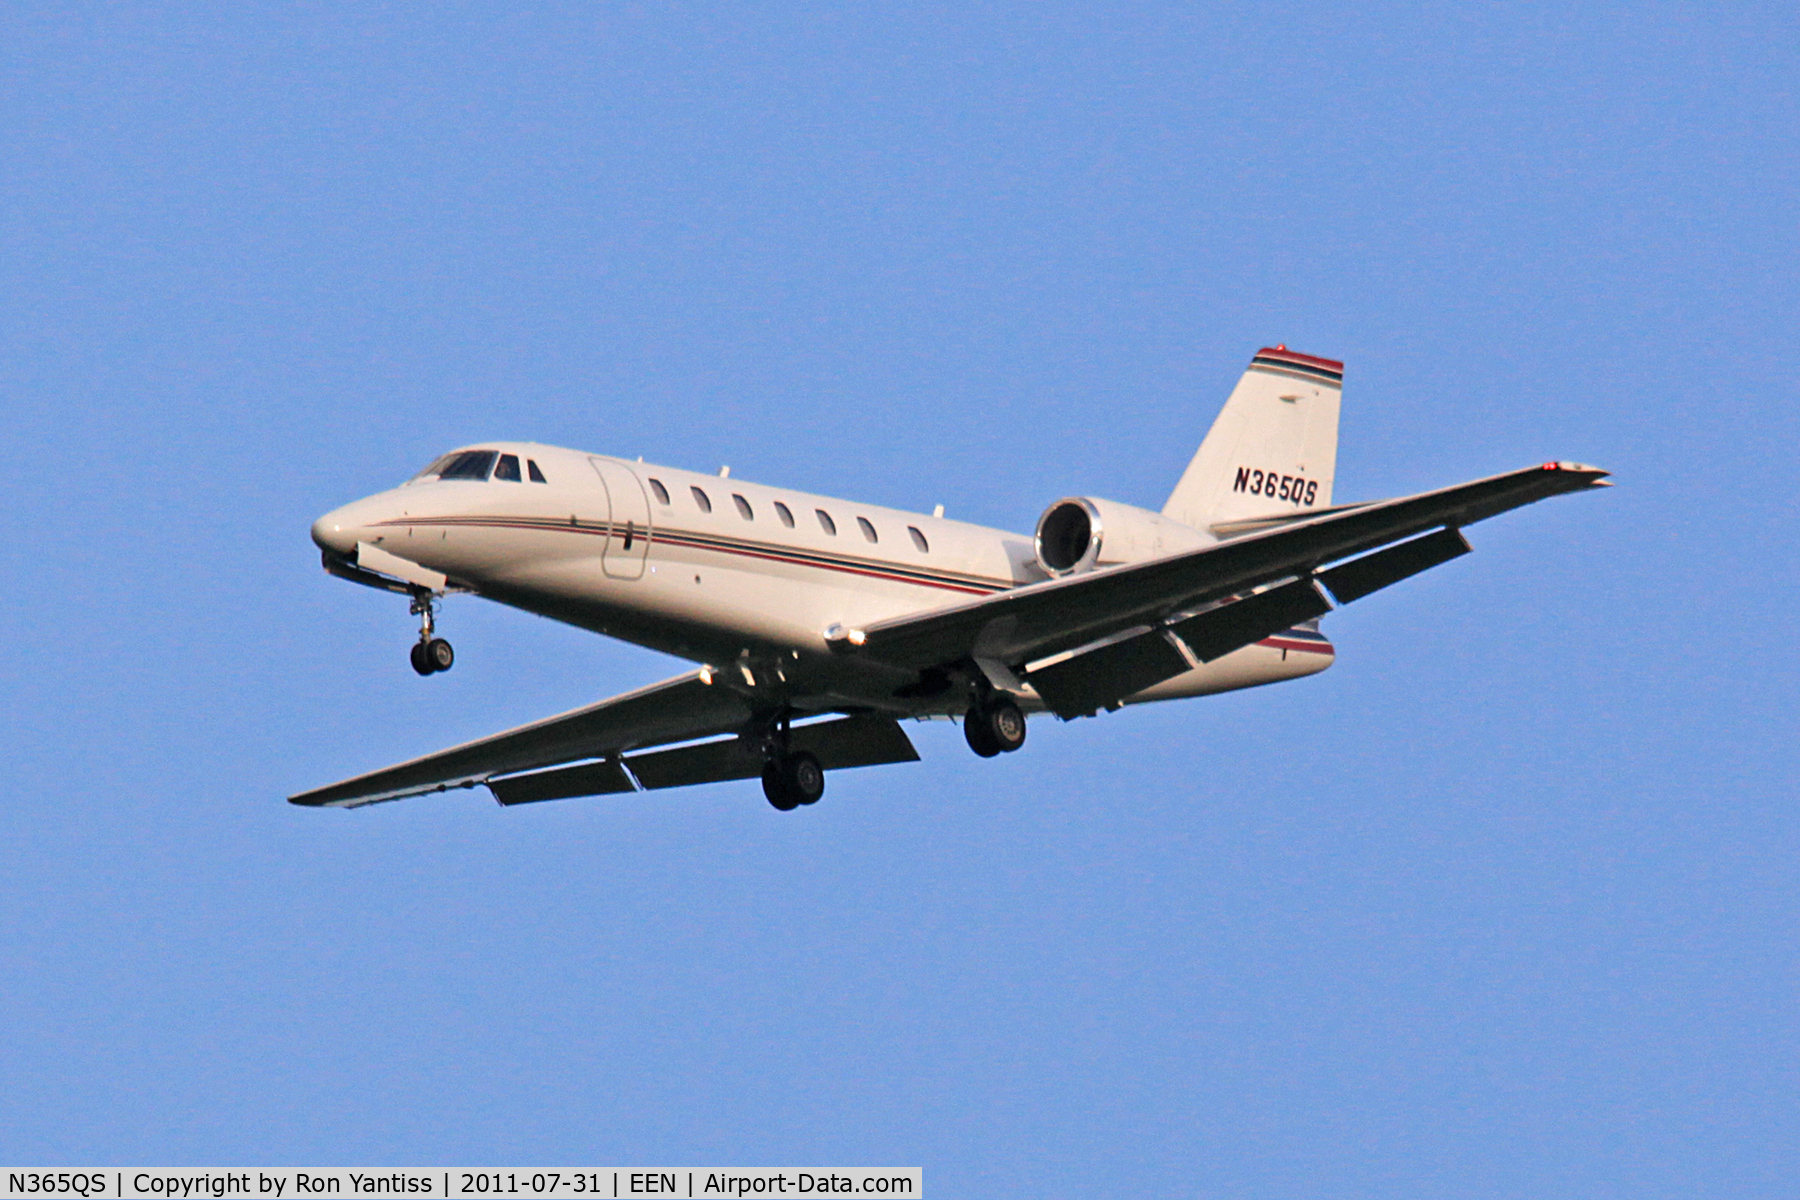 N365QS, 2005 Cessna 680 Citation Sovereign C/N 680-0057, On approach to runway 02, Keene, NH